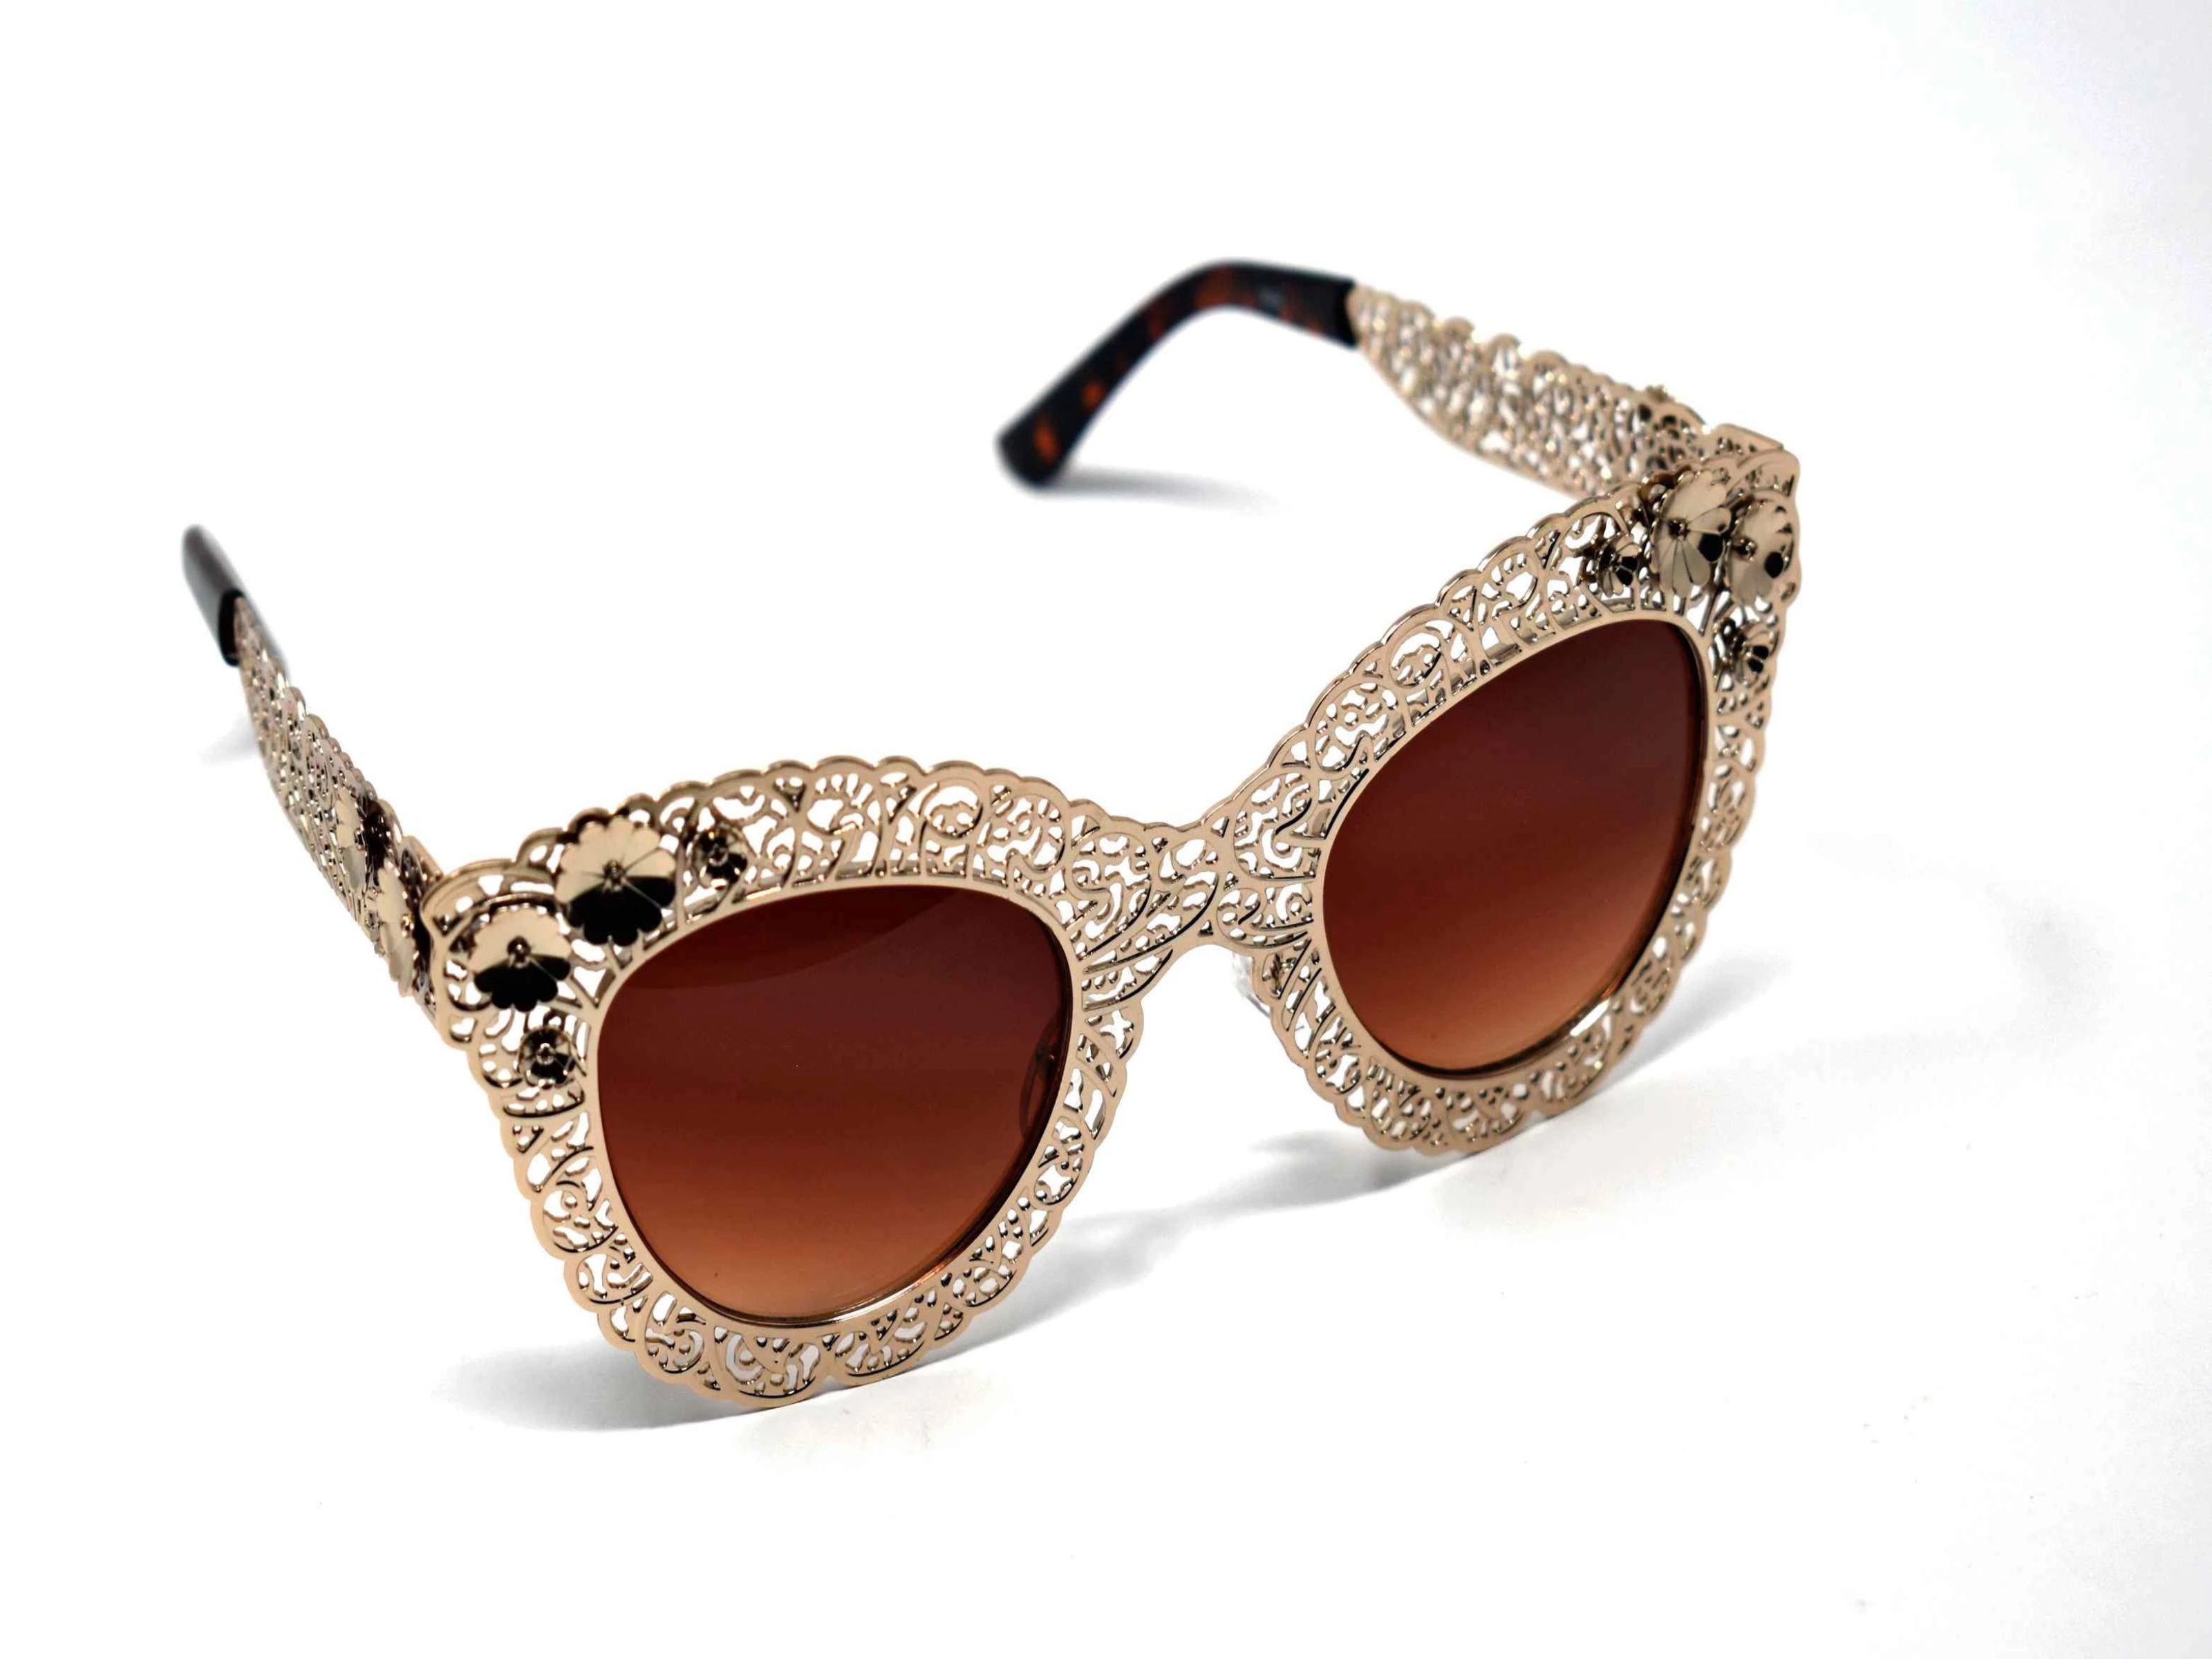 Both dainty and daring be bold in our Cardinal rose gold metal frame sunglasses with brown lens.